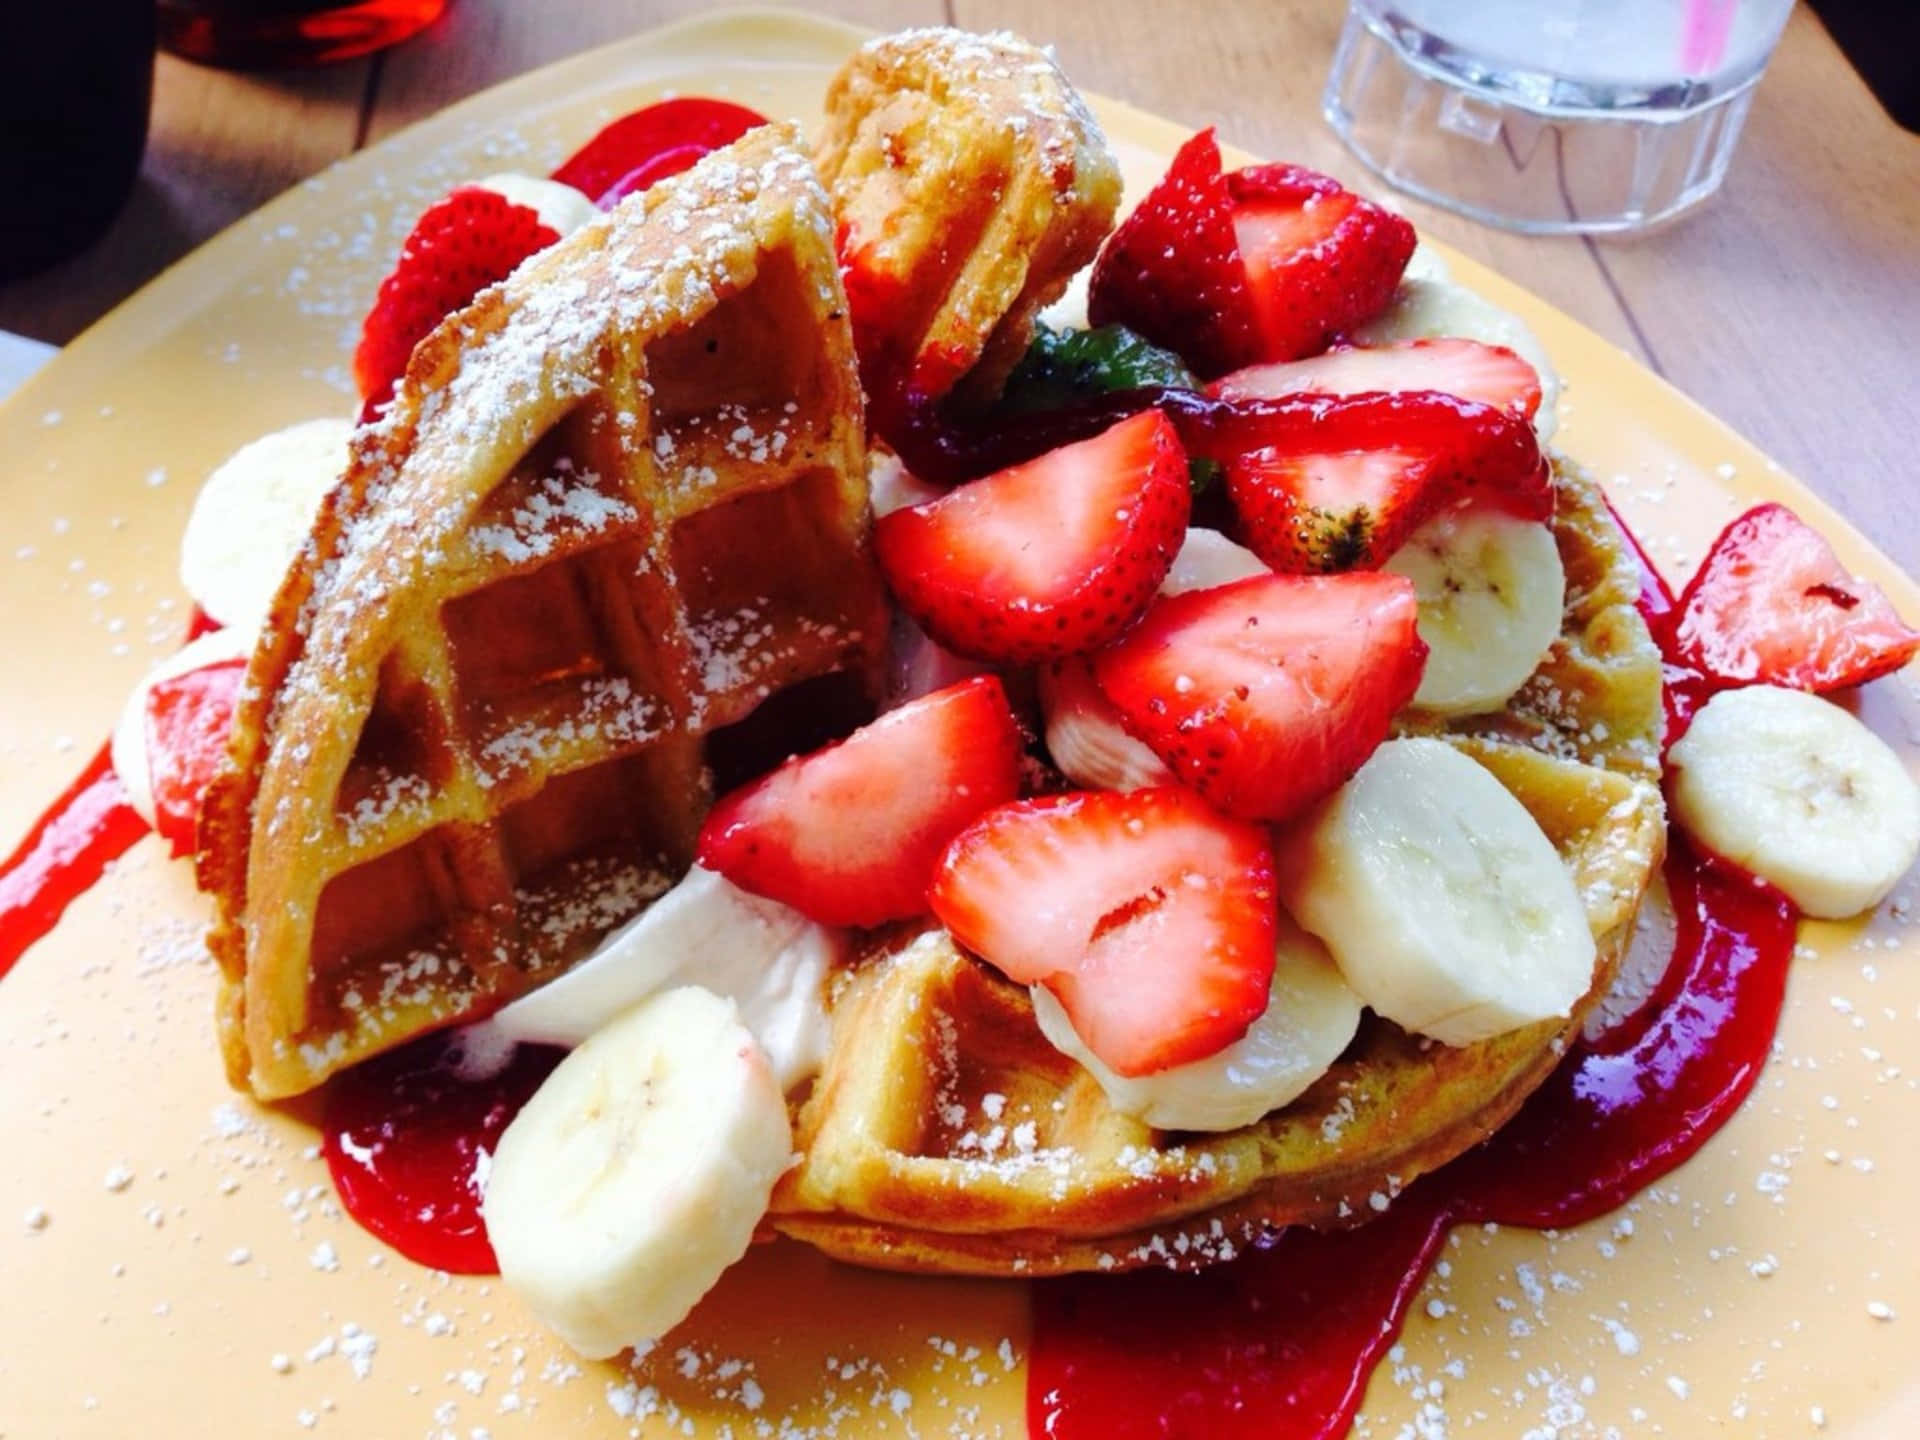 Delicious Golden Waffles with Fresh Fruits